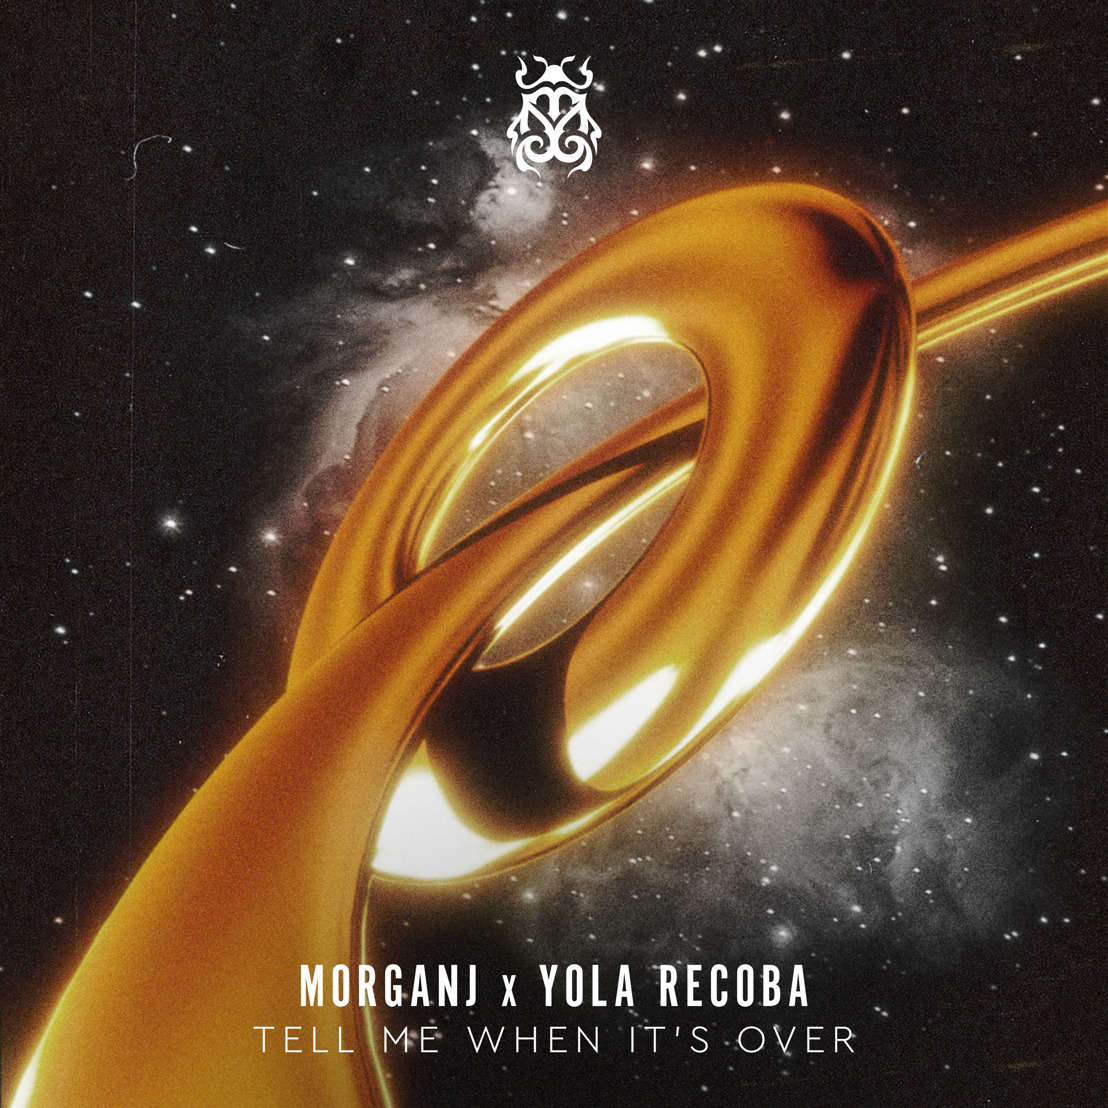 MorganJ and Yola Recoba release house weapon ‘Tell Me When It’s Over’